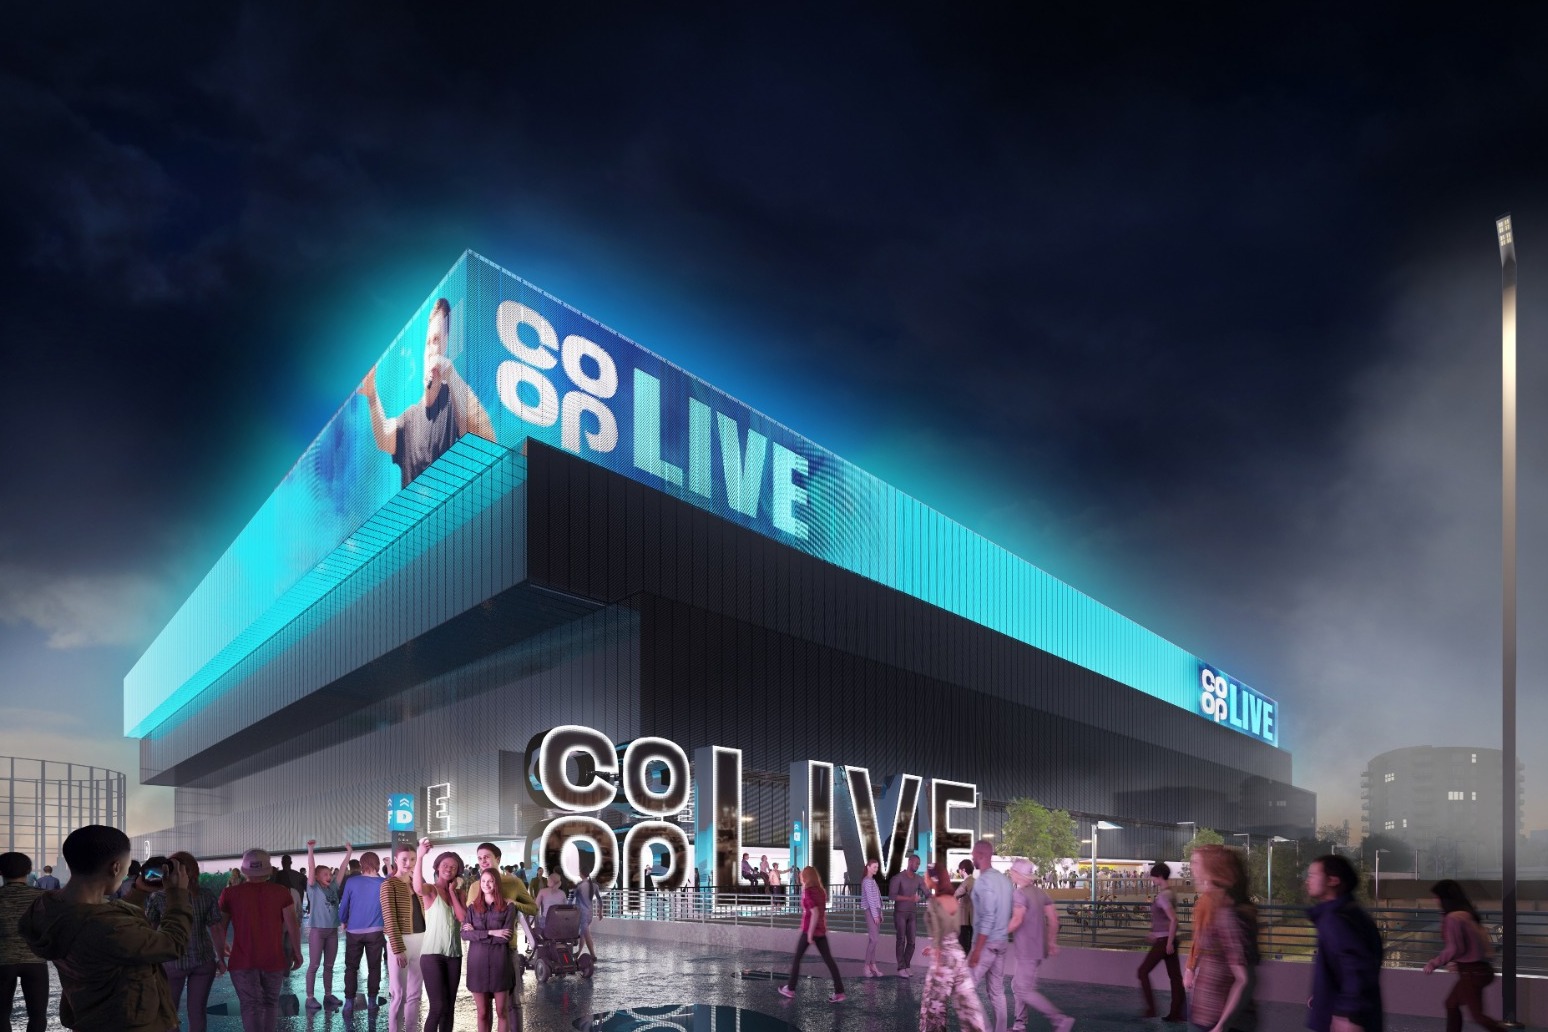 Co Op Live arena boss quits